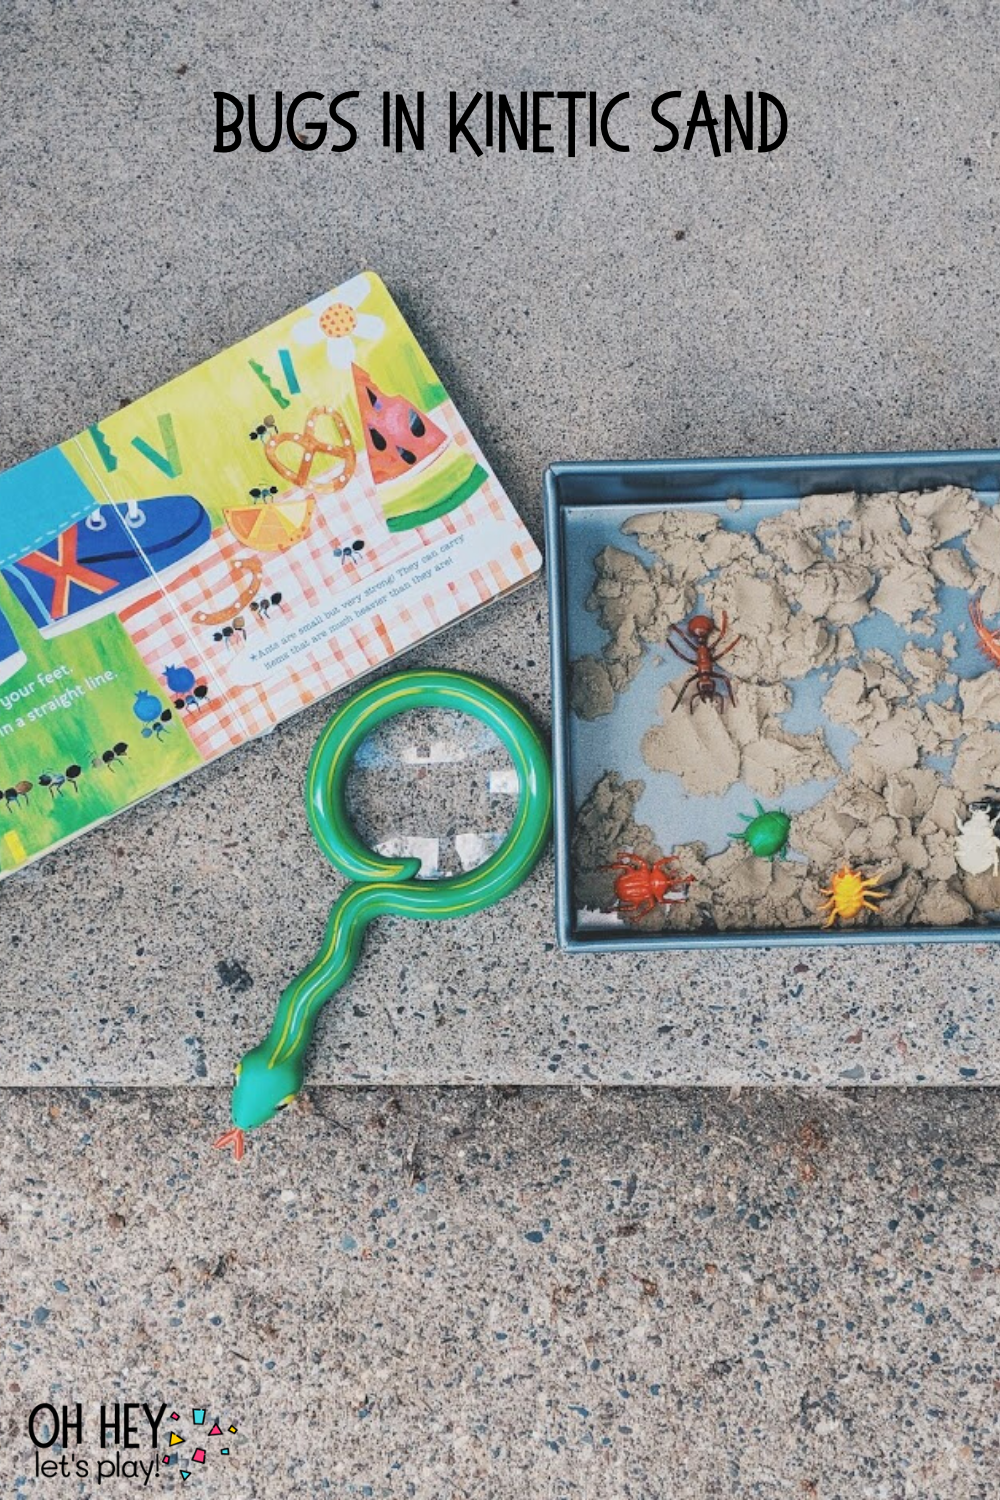 Bugs in Kinetic Sand 30+ Activities for 1-2 Year Old Toddlers - Oh Hey Let's Play www.ohheyletsplay.com.png